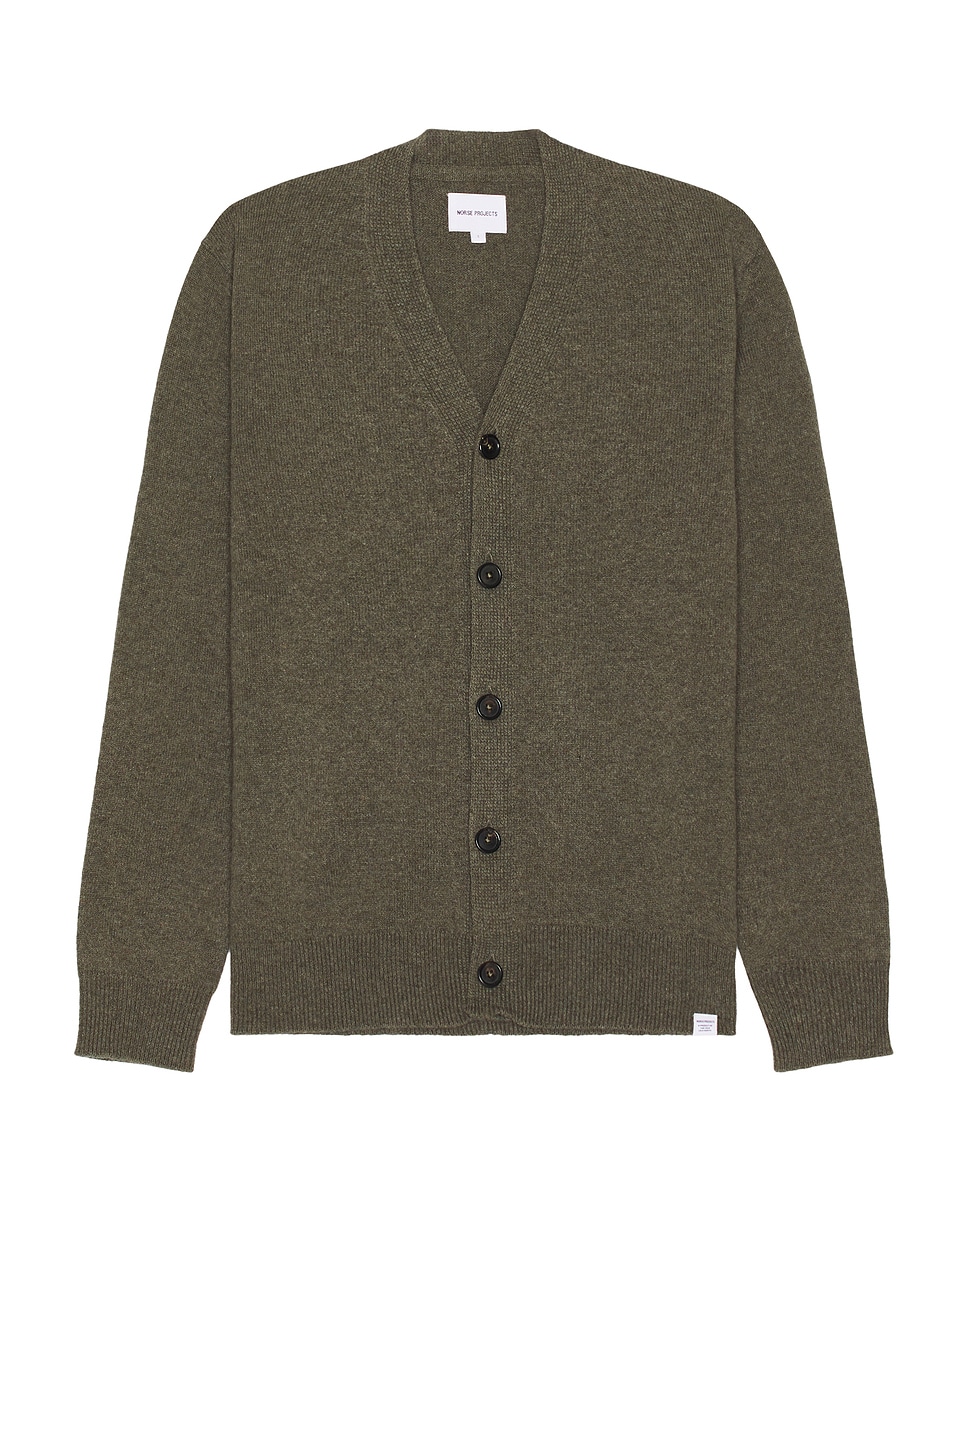 Image 1 of Norse Projects Adam Merino Lambswool Cardigan in Ivy Green